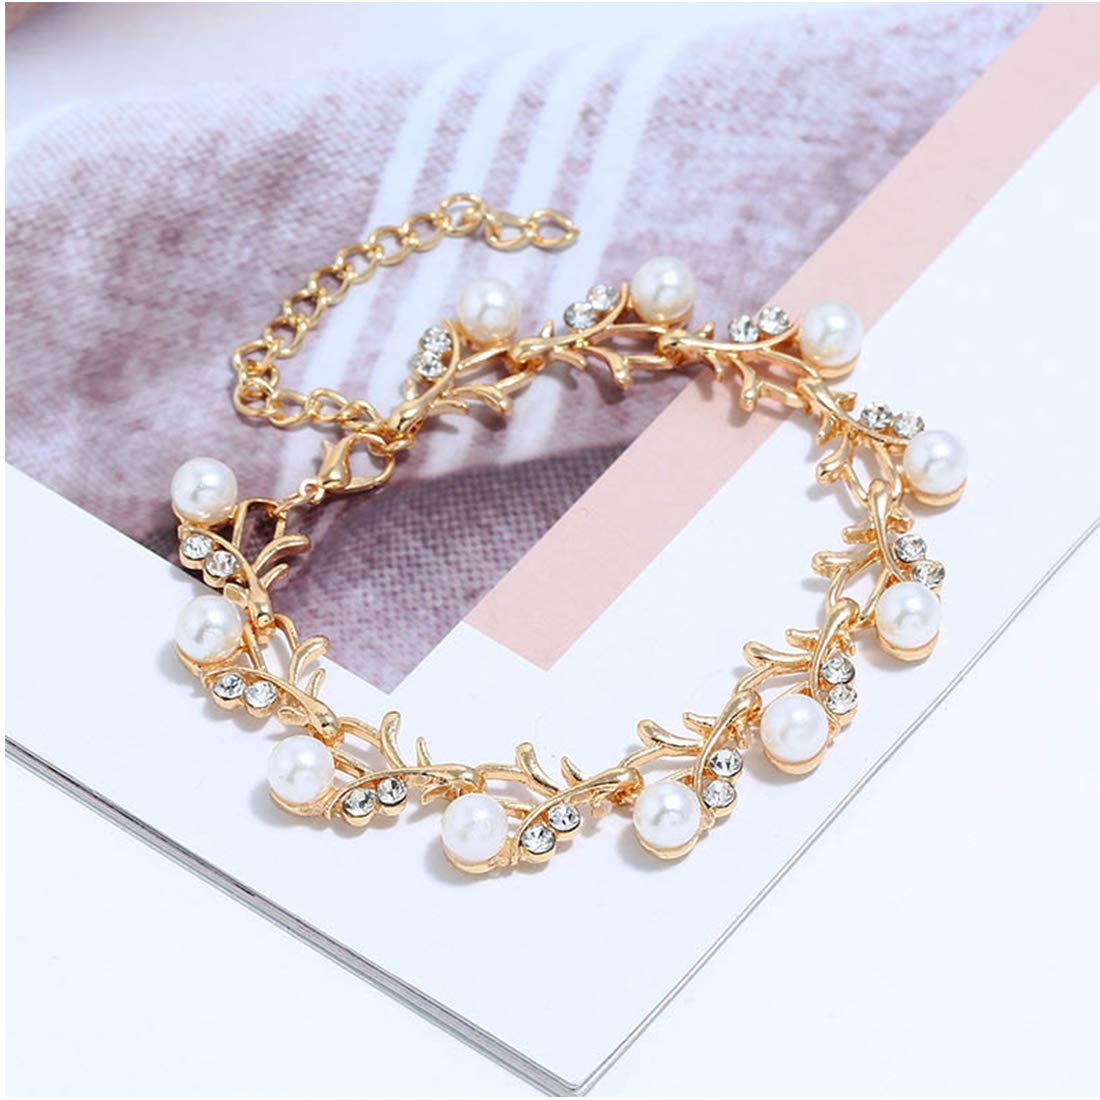 Yellow Chimes Celebrity Choice Classic Adorable Water Pearls Crystals Gold Plated Bracelet for Women and Girls